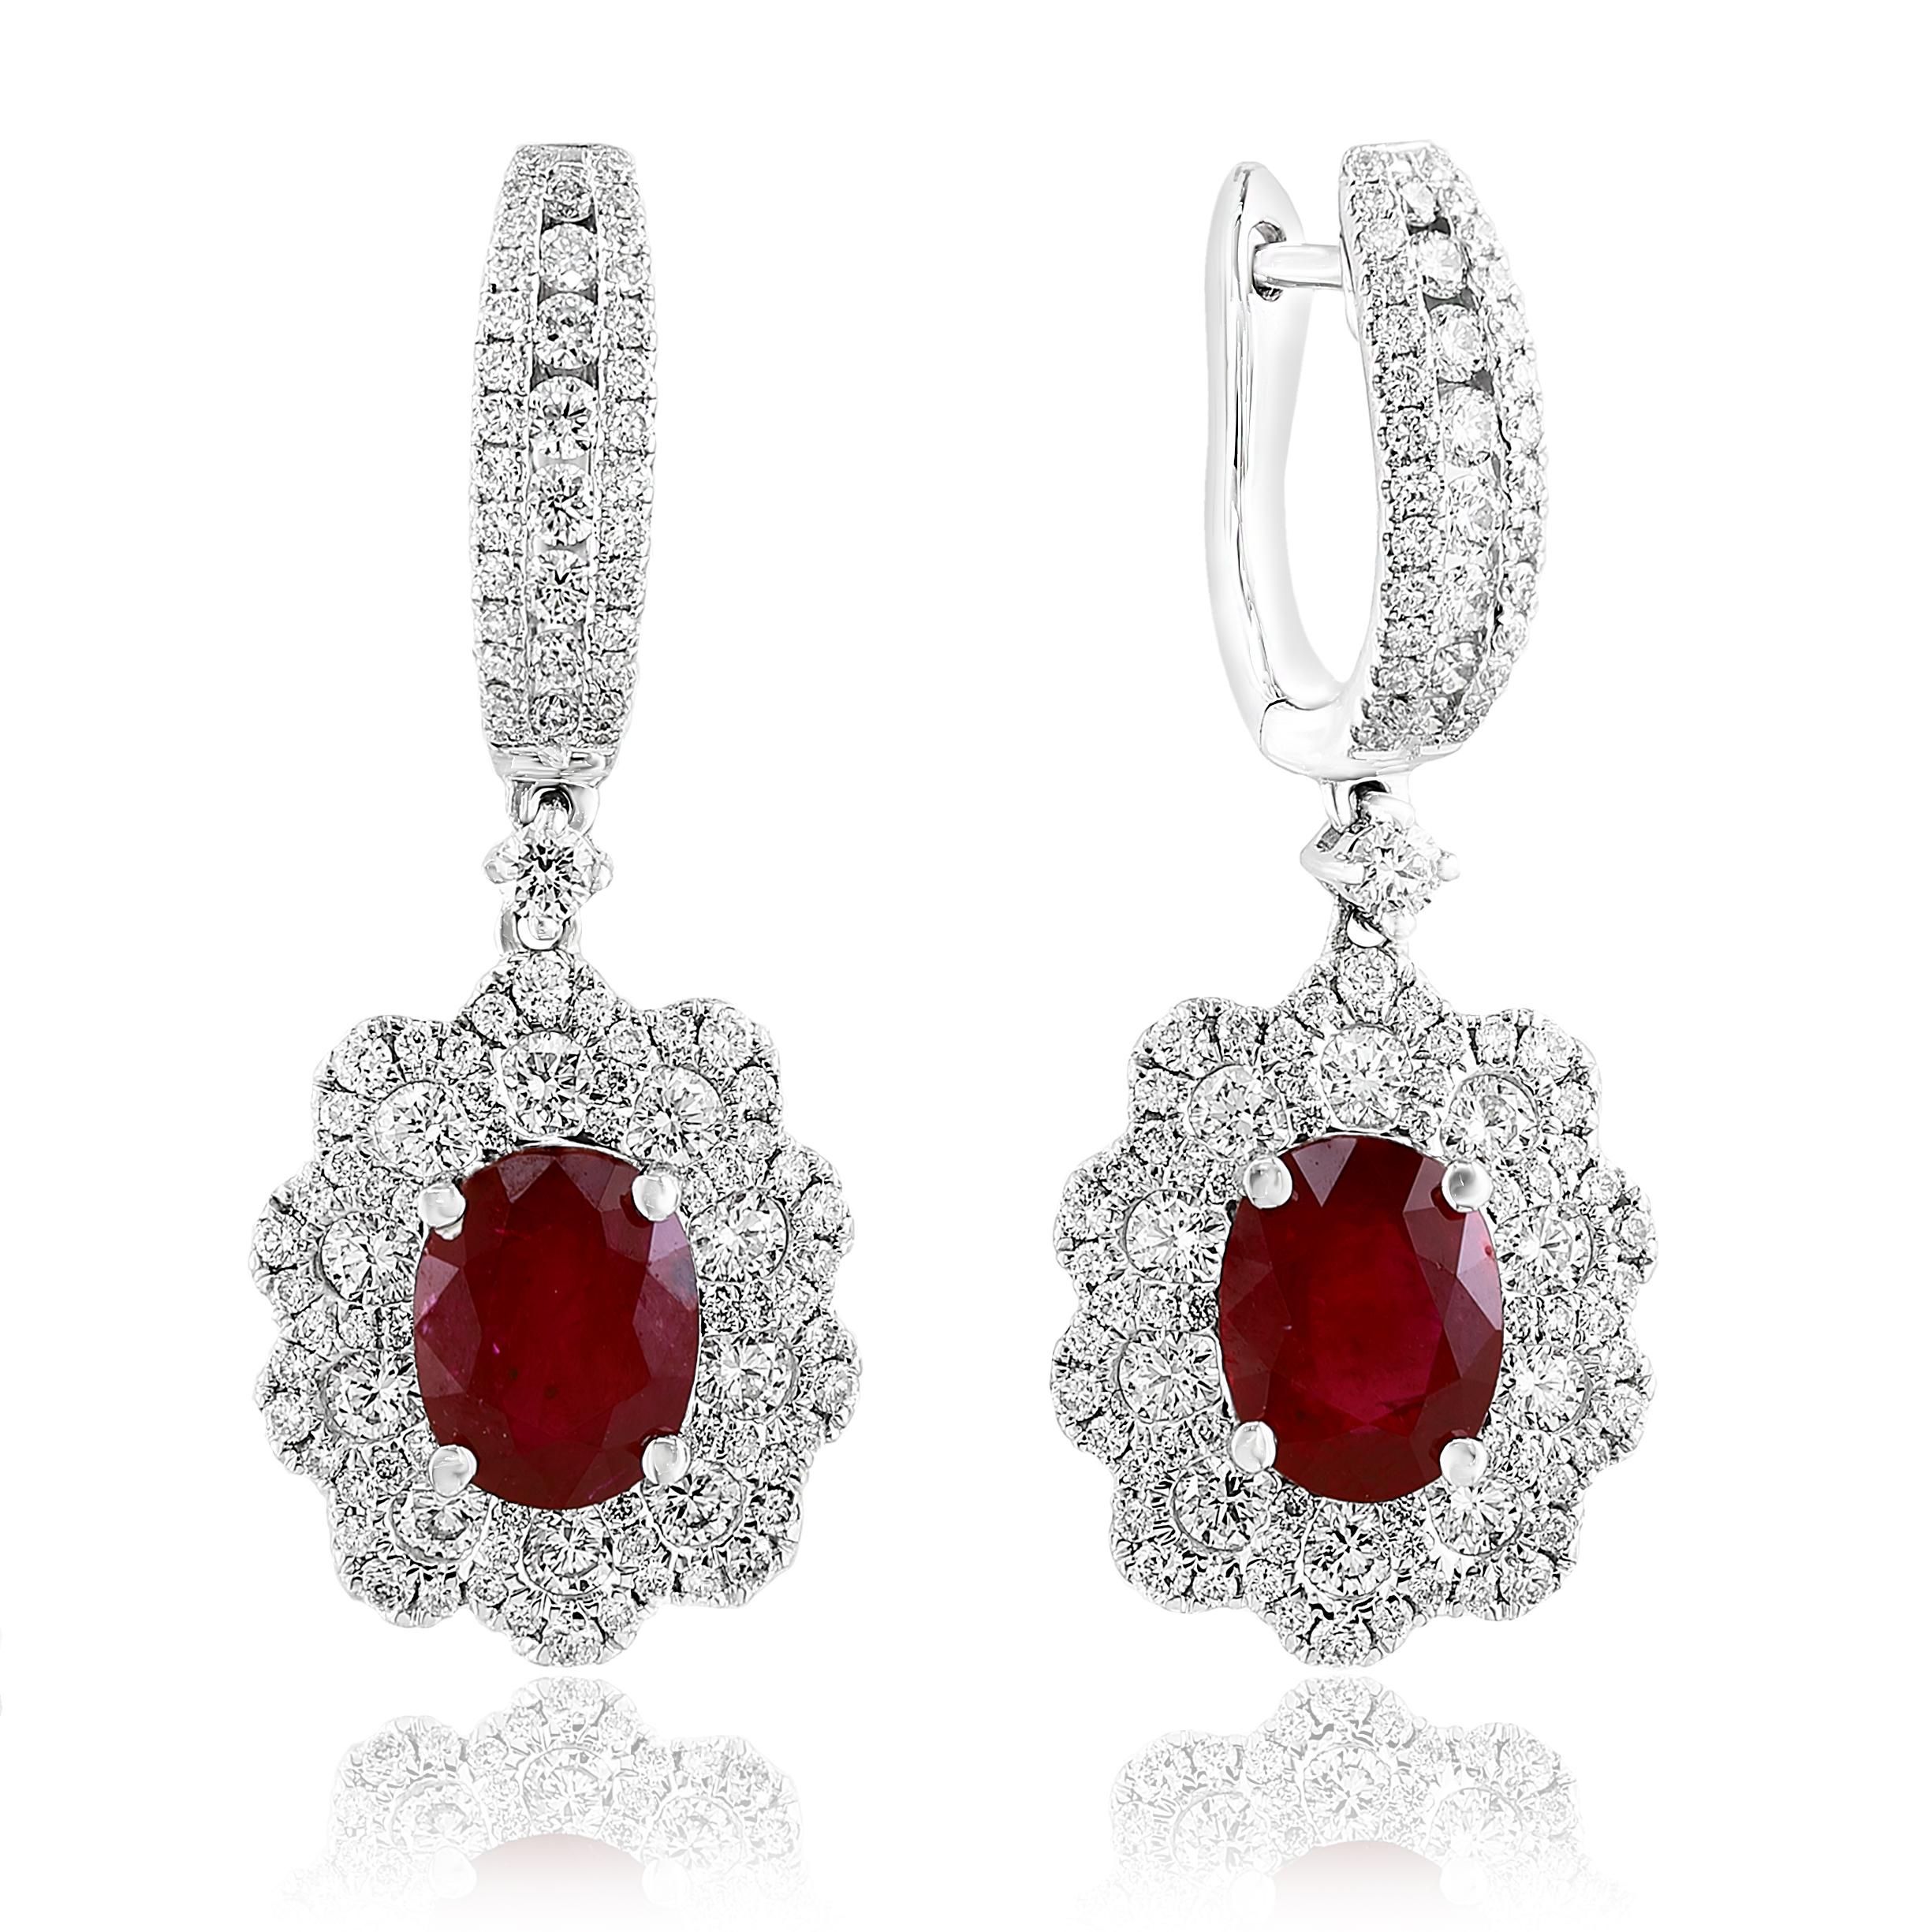 Dangle earrings featuring Oval shape red Rubies weighing 2.86 carats total, surrounded by two rows of round brilliant diamonds in a flower design. 194 Accent Diamonds weigh 0.98 carats and 20 accent diamonds weigh 0.79 carats in total. Made in 18